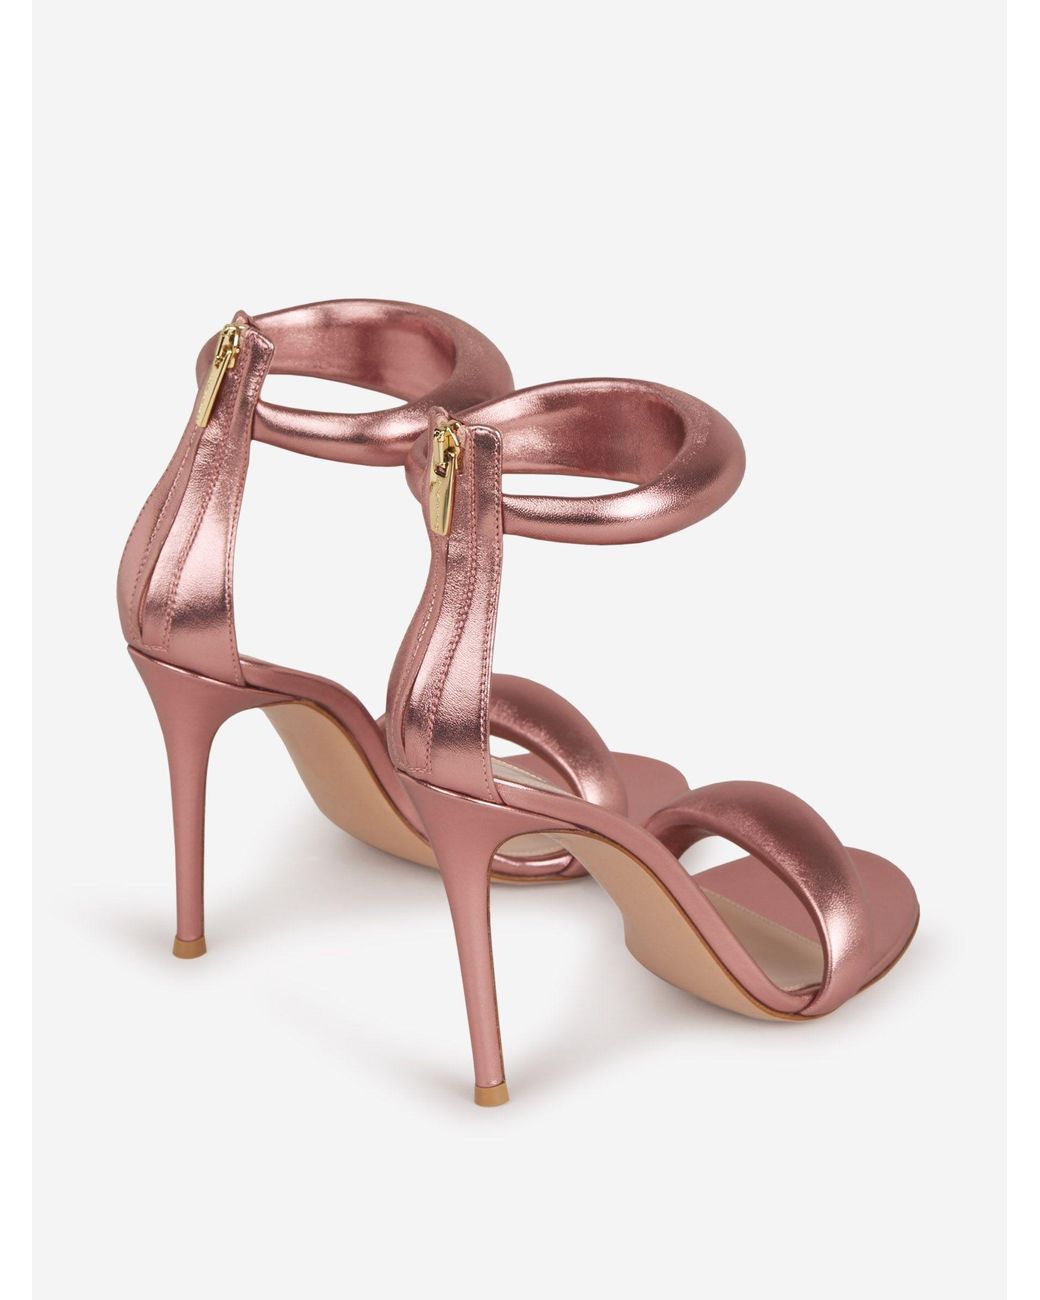 Gianvito Rossi Leather Bijoux Heeled Sandals in Pink | Lyst